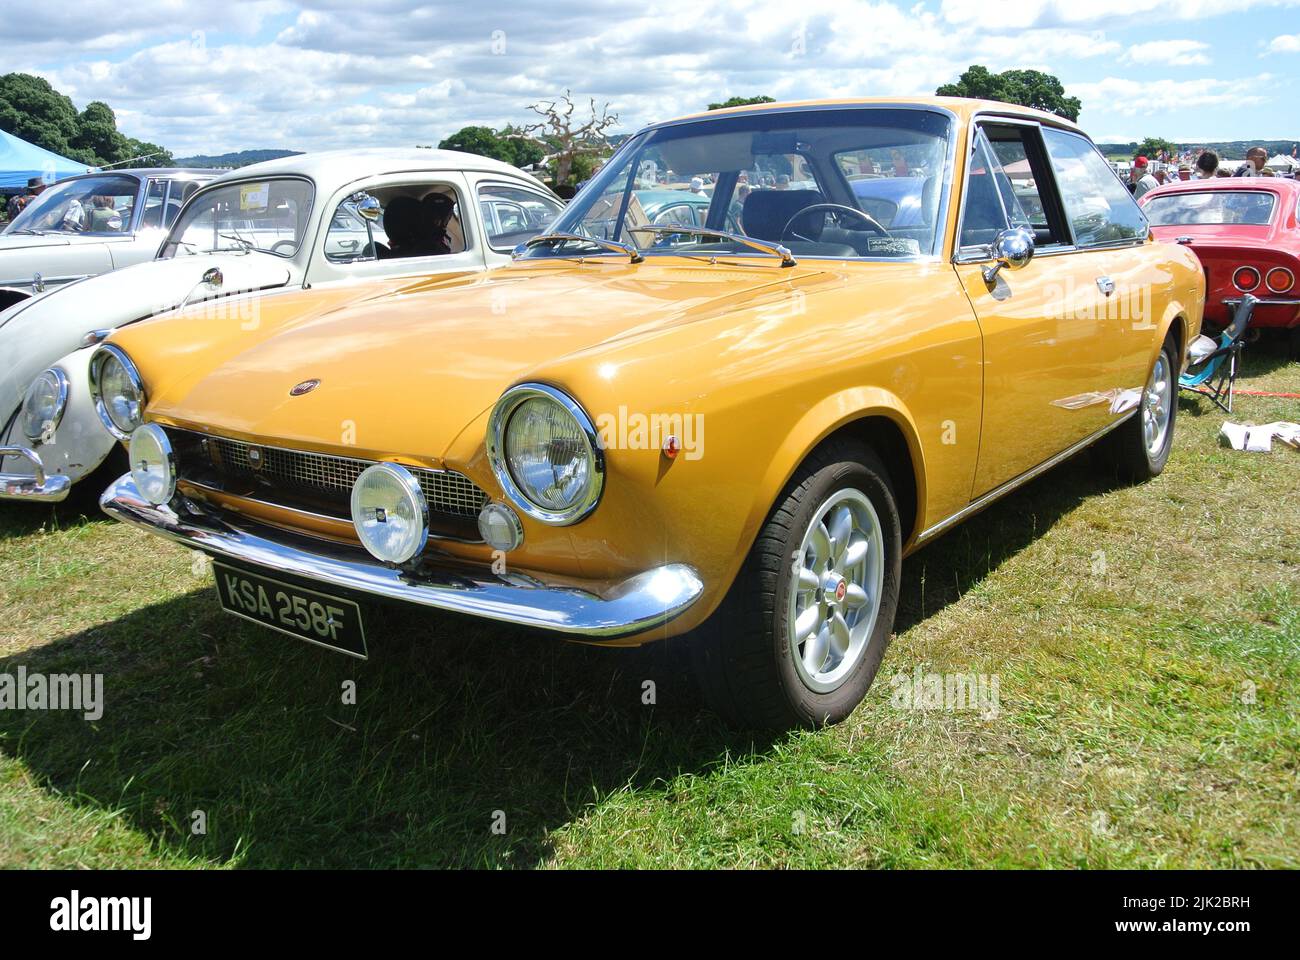 A 1968 Fiat 124 Sport Coupe parked on display at the 47th Historic Vehicle Gathering classic car show, Powderham, Devon, England, UK. Stock Photo